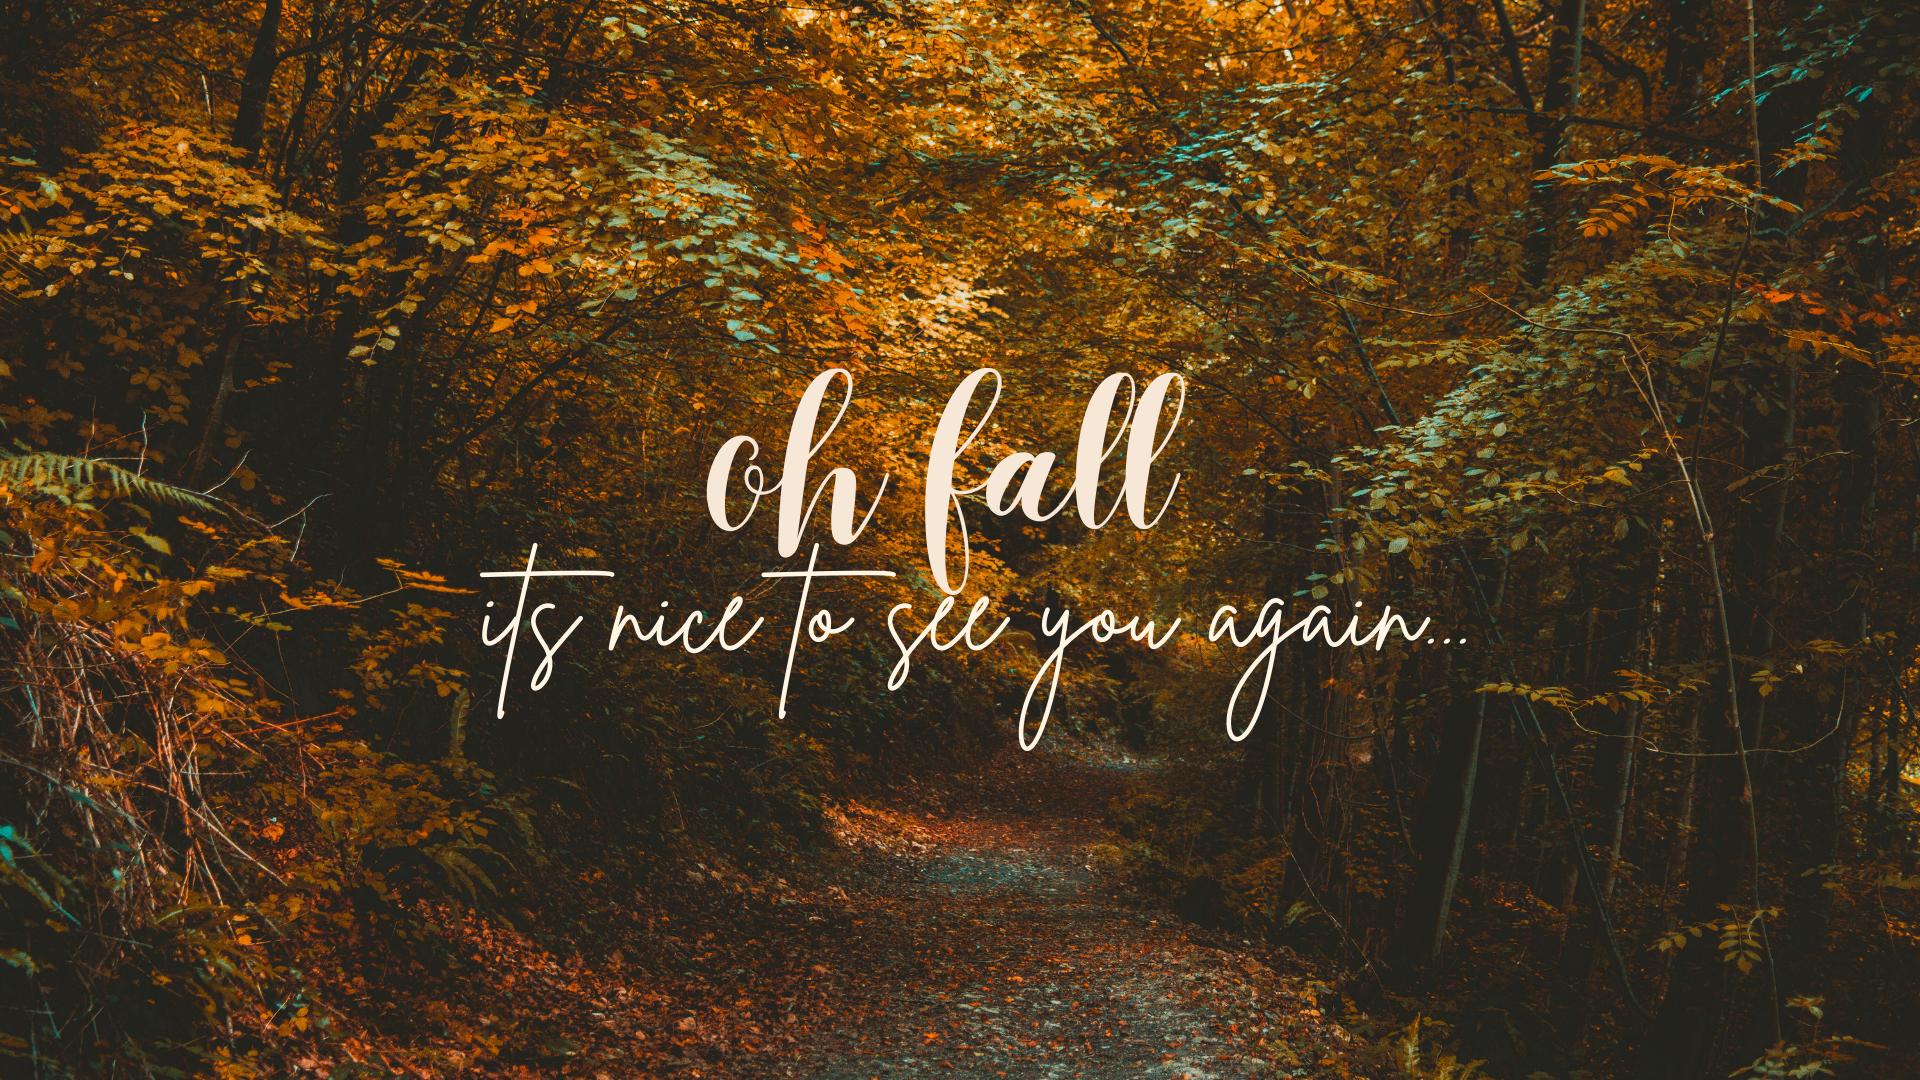 A collection of free aesthetic fall wallpapers available for iPhone and desktop. These wallpapers capture the beauty of autumn with vibrant foliage, cozy scenes, and rustic landscapes. Download and personalize your devices with these stunning fall-themed images.